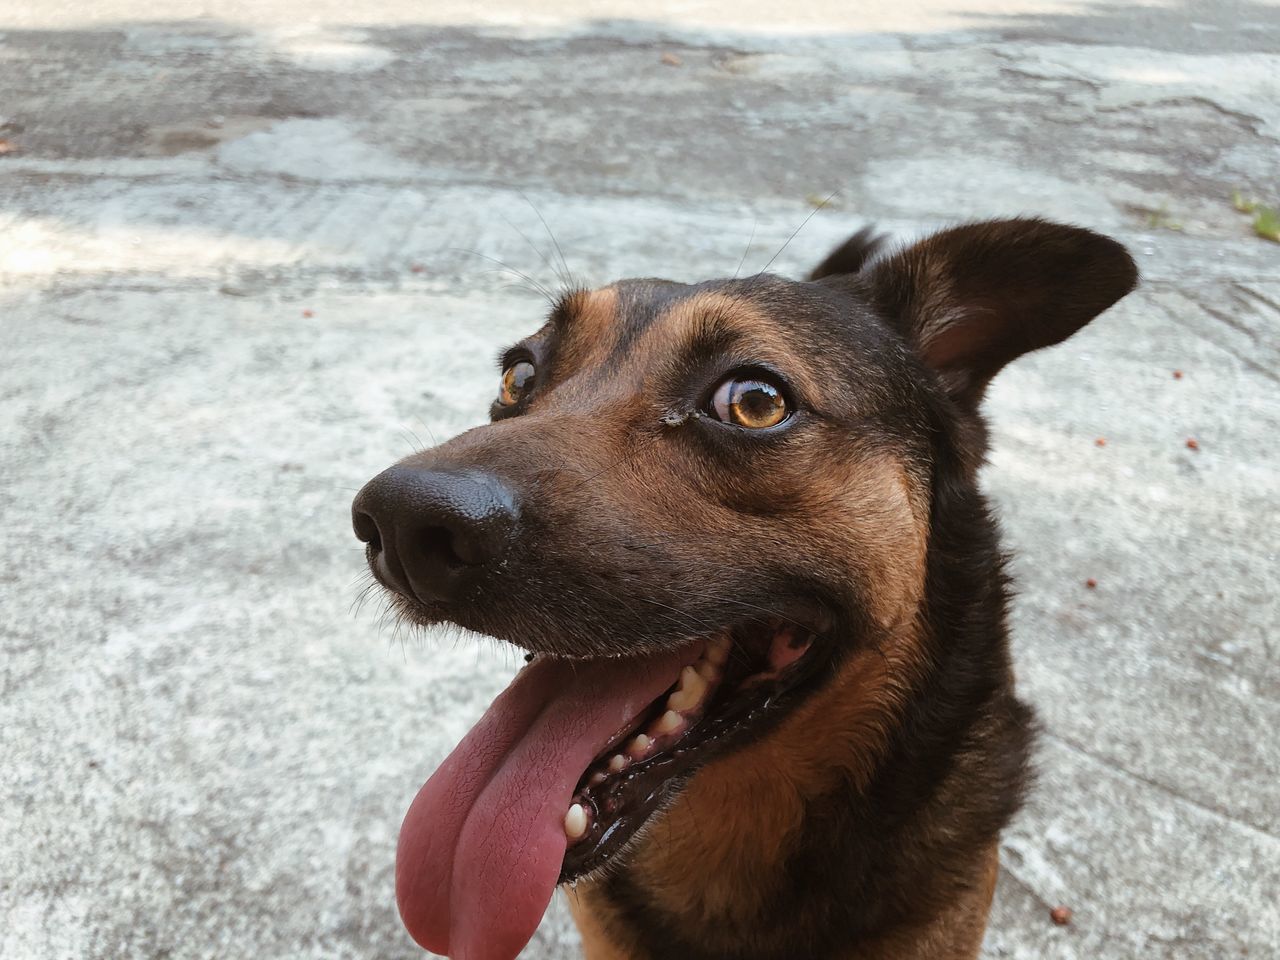 dog, one animal, canine, animal themes, pets, domestic, domestic animals, animal, mammal, vertebrate, animal body part, looking, looking away, close-up, no people, day, focus on foreground, mouth open, sticking out tongue, animal head, outdoors, animal tongue, animal mouth